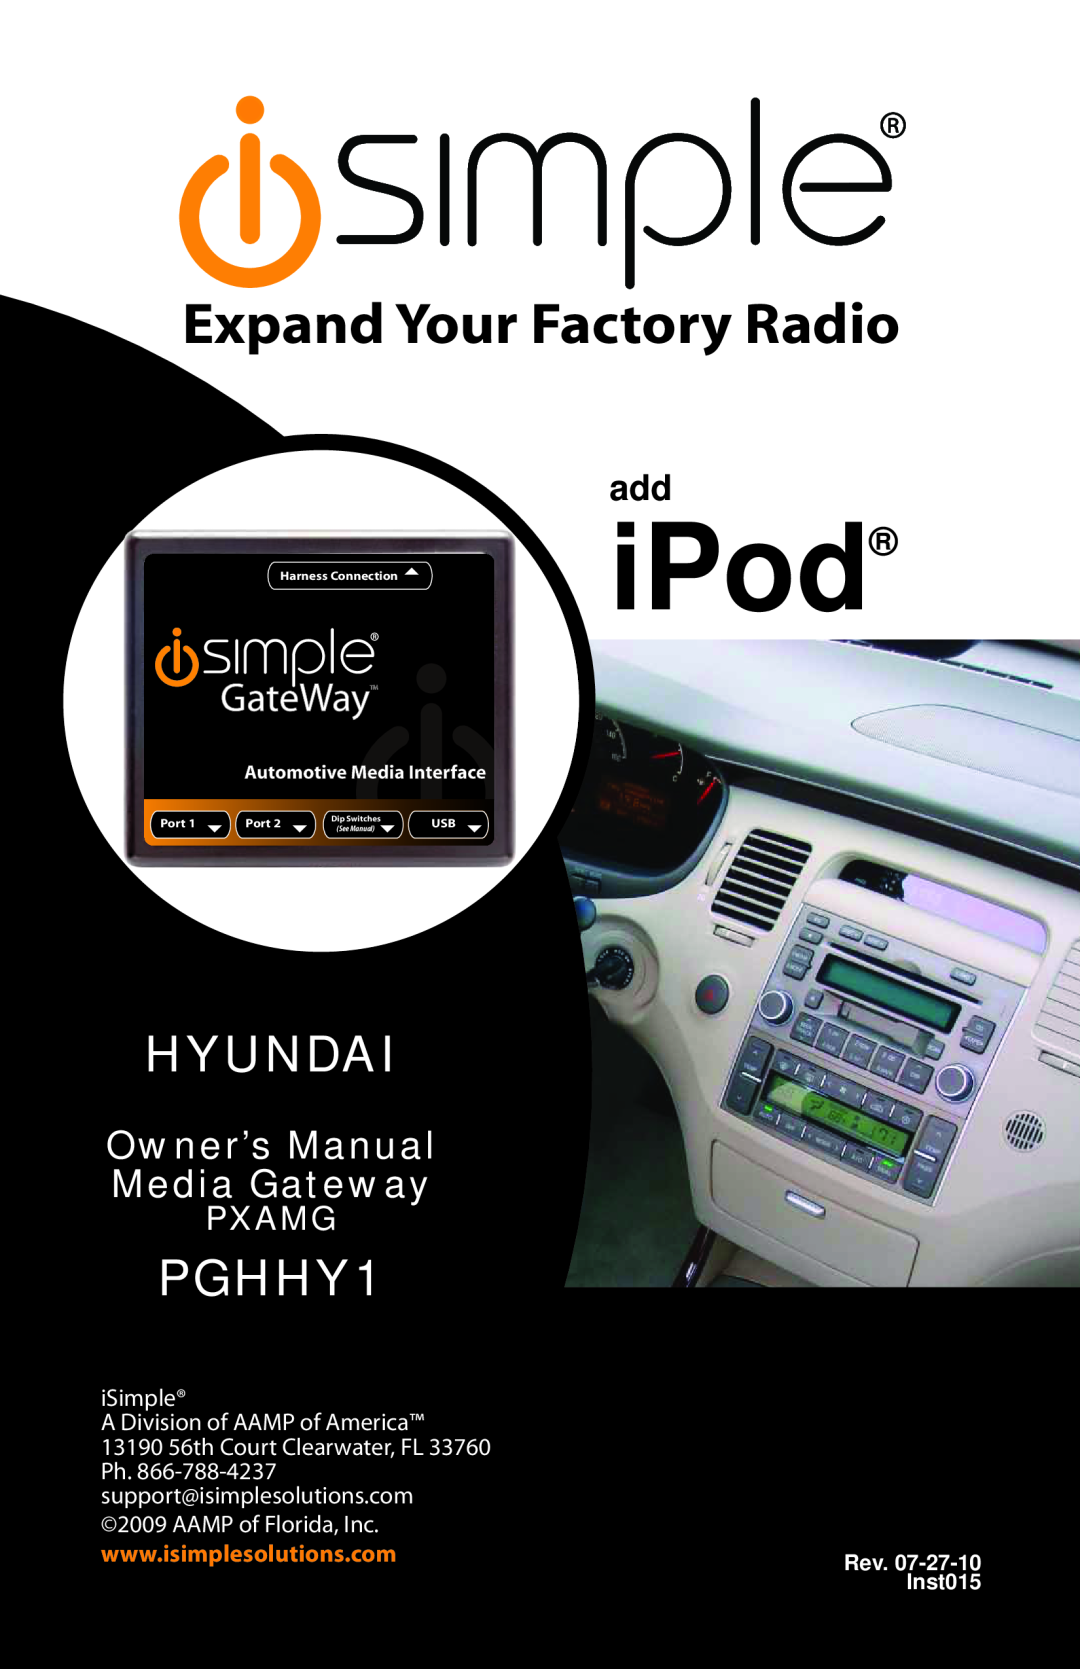 iSimple PGHHY1 owner manual iPod, Expand Your Factory Radio, Hyundai, Pxamg, iSimple A Division of AAMP of America, Rev 